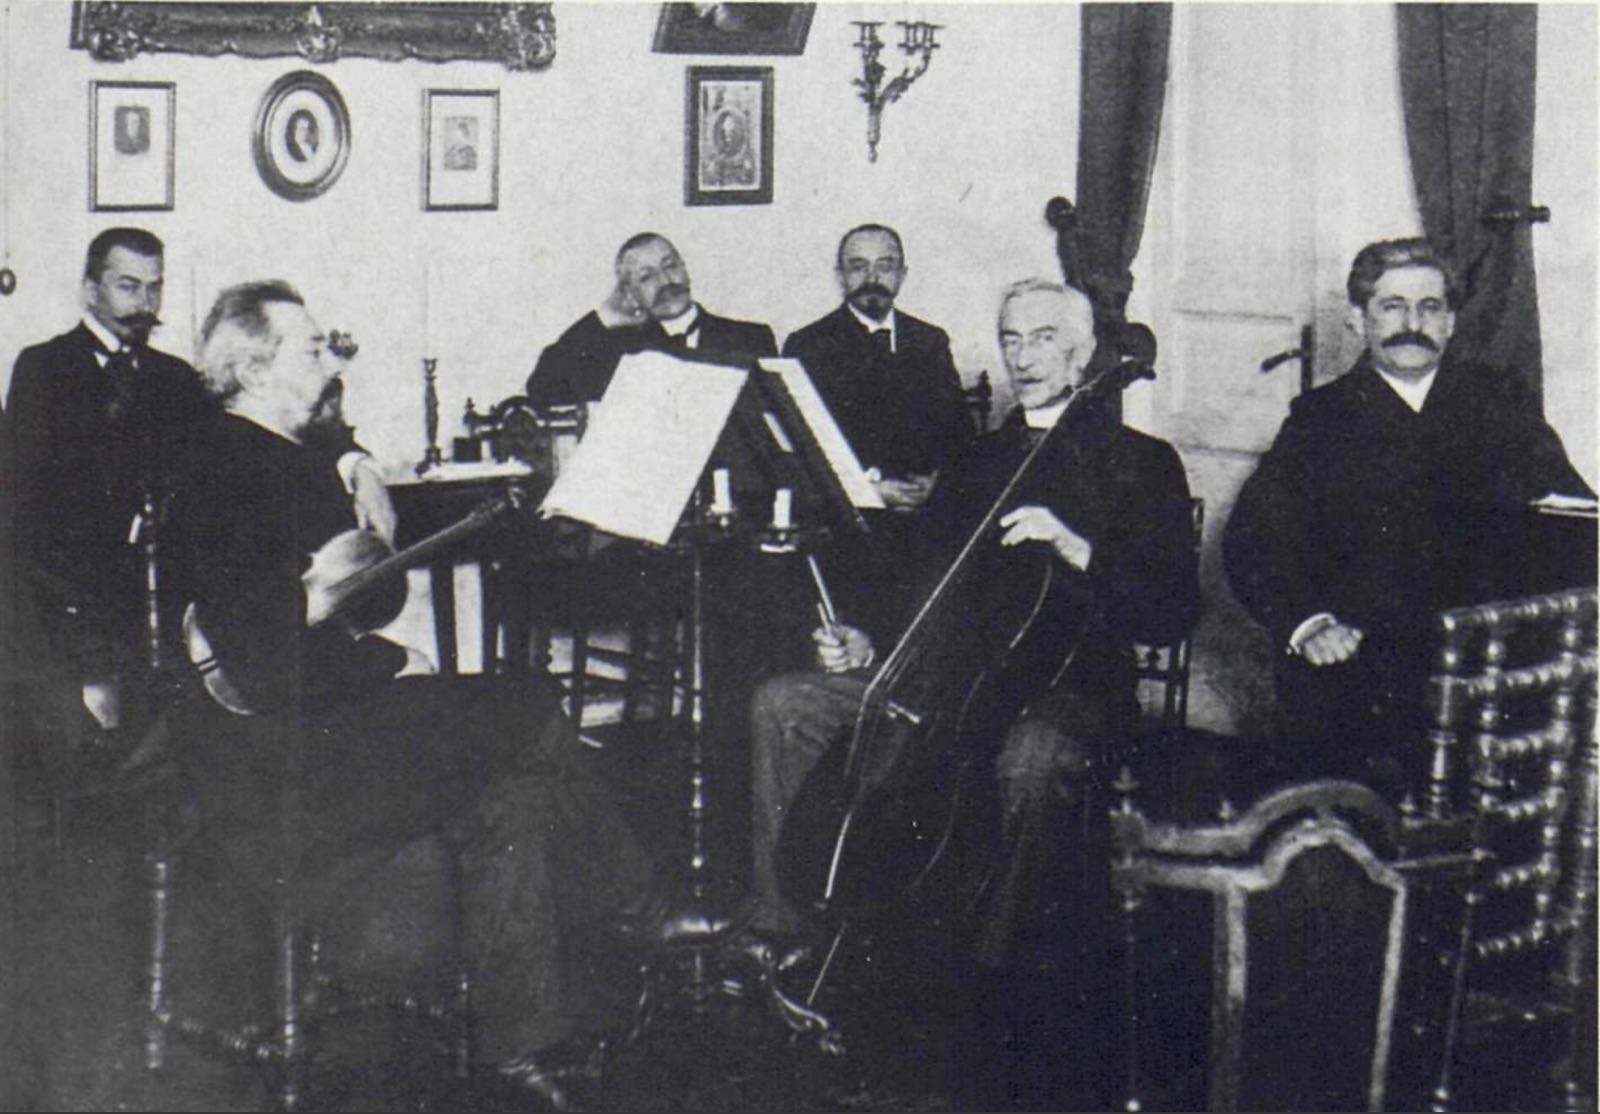 High society chamber music in Russia in c. 1900